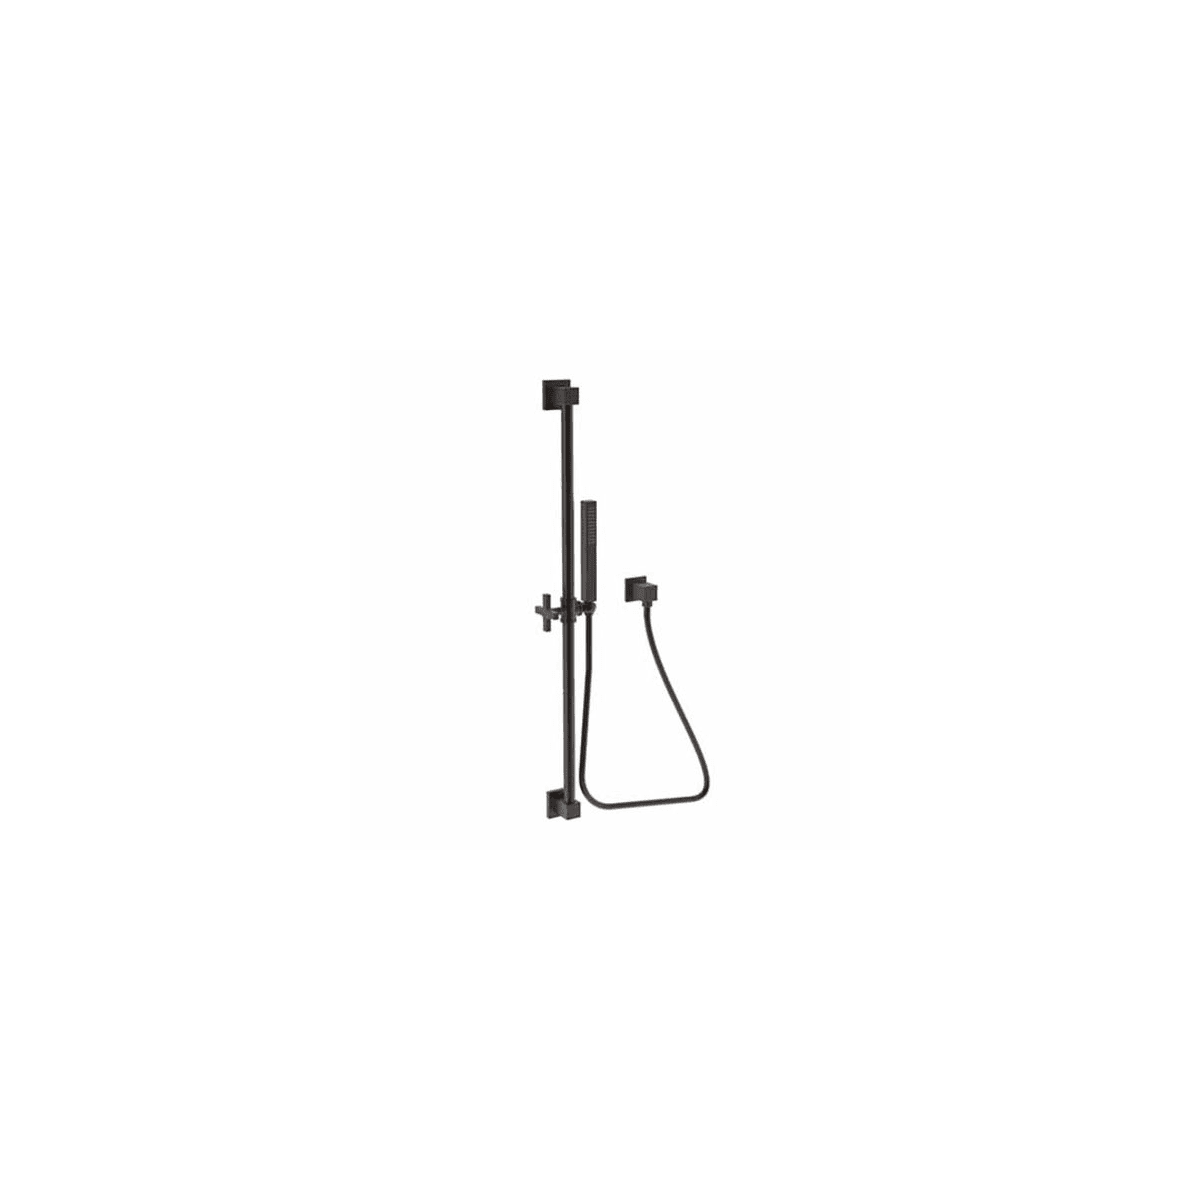 Newport Brass 280T/04 Satin Brass - PVD 1.8 GPM Single Function Hand Shower  Package - Includes Hand Shower, Slide Bar, and Hose 